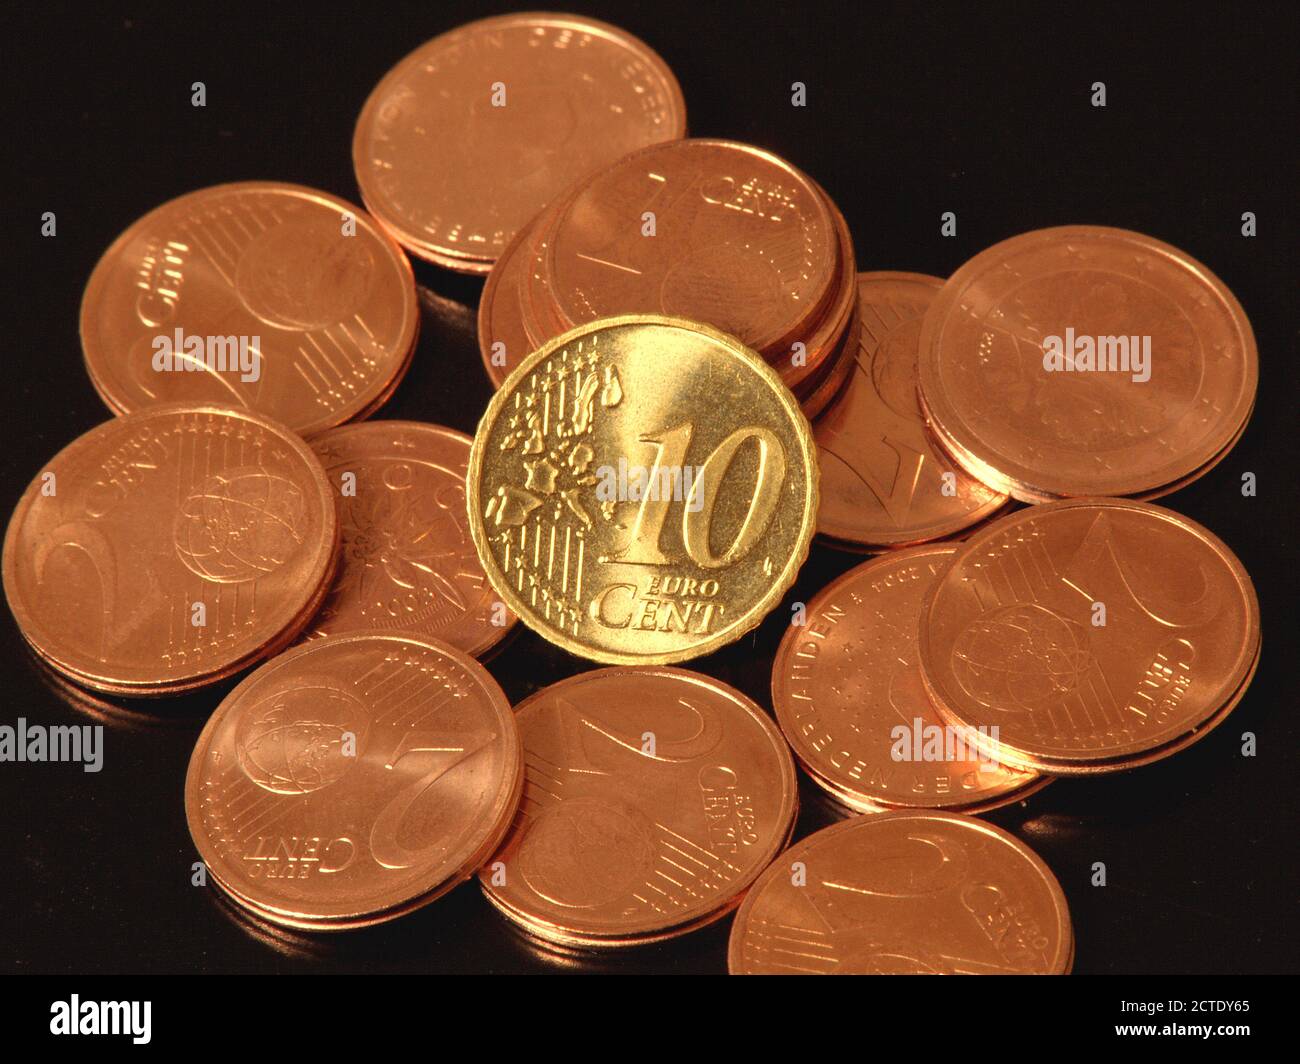 Euro cent coins on black background, Europe Stock Photo